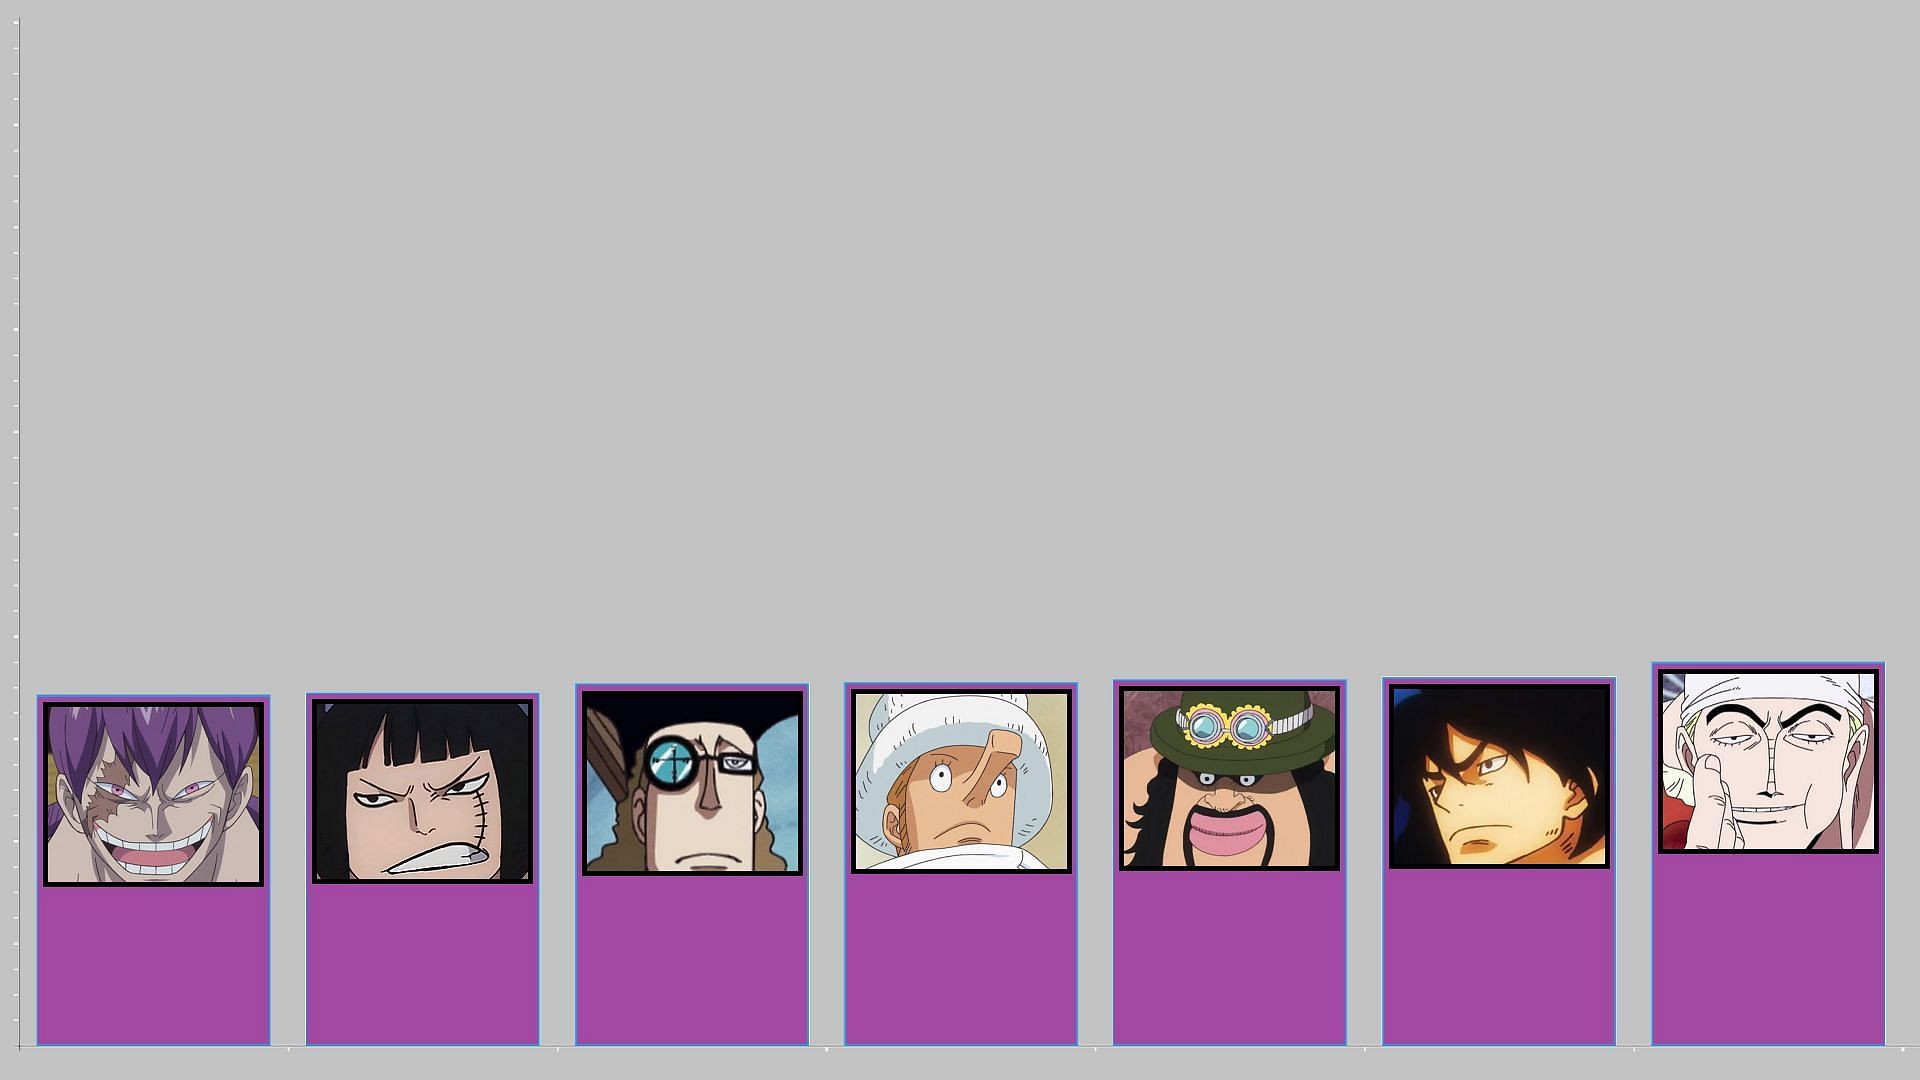 Left to right, positions from 77th to 83rd (Image via Toei Animation, One Piece)